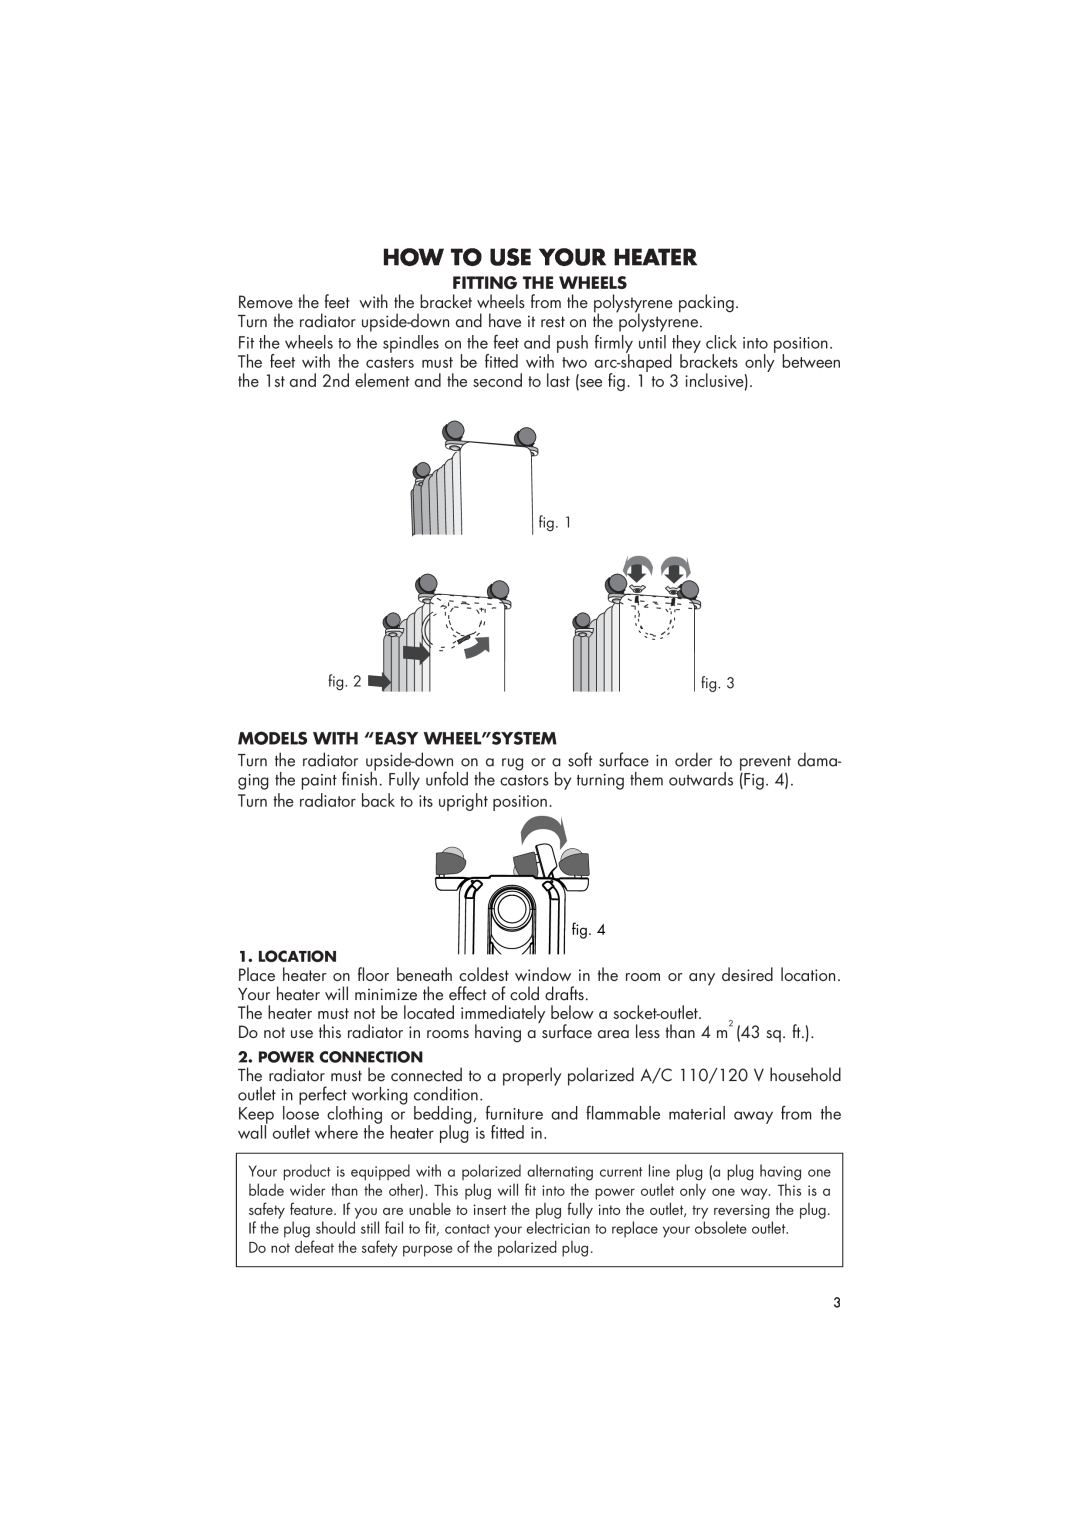 DeLonghi 6708EK manual How To Use Your Heater, Fitting The Wheels, Models With “Easy Wheel”System 